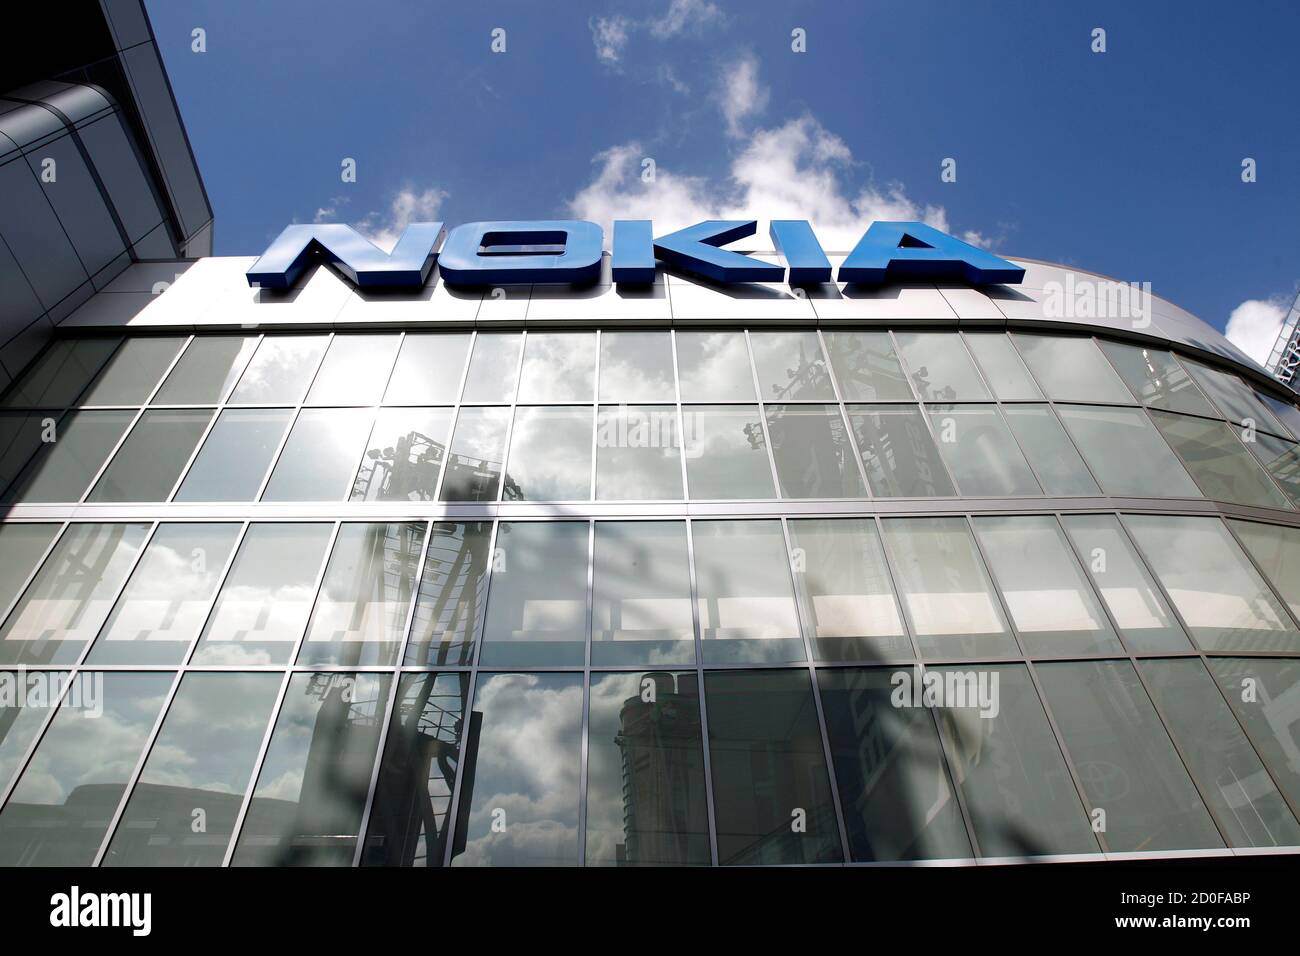 The Nokia Theatre is pictured in Los Angeles, California October 9, 2012. Billionaire Phil Anschutz has kicked off the auction of his Anschutz Entertainment Group, with an expectation that the sports and entertainment giant should draw bids in the $10 billion range, higher than previously believed, according to sources familiar with the situation.   REUTERS/Mario Anzuoni (UNITED STATES - Tags: ENTERTAINMENT BUSINESS) Stock Photo